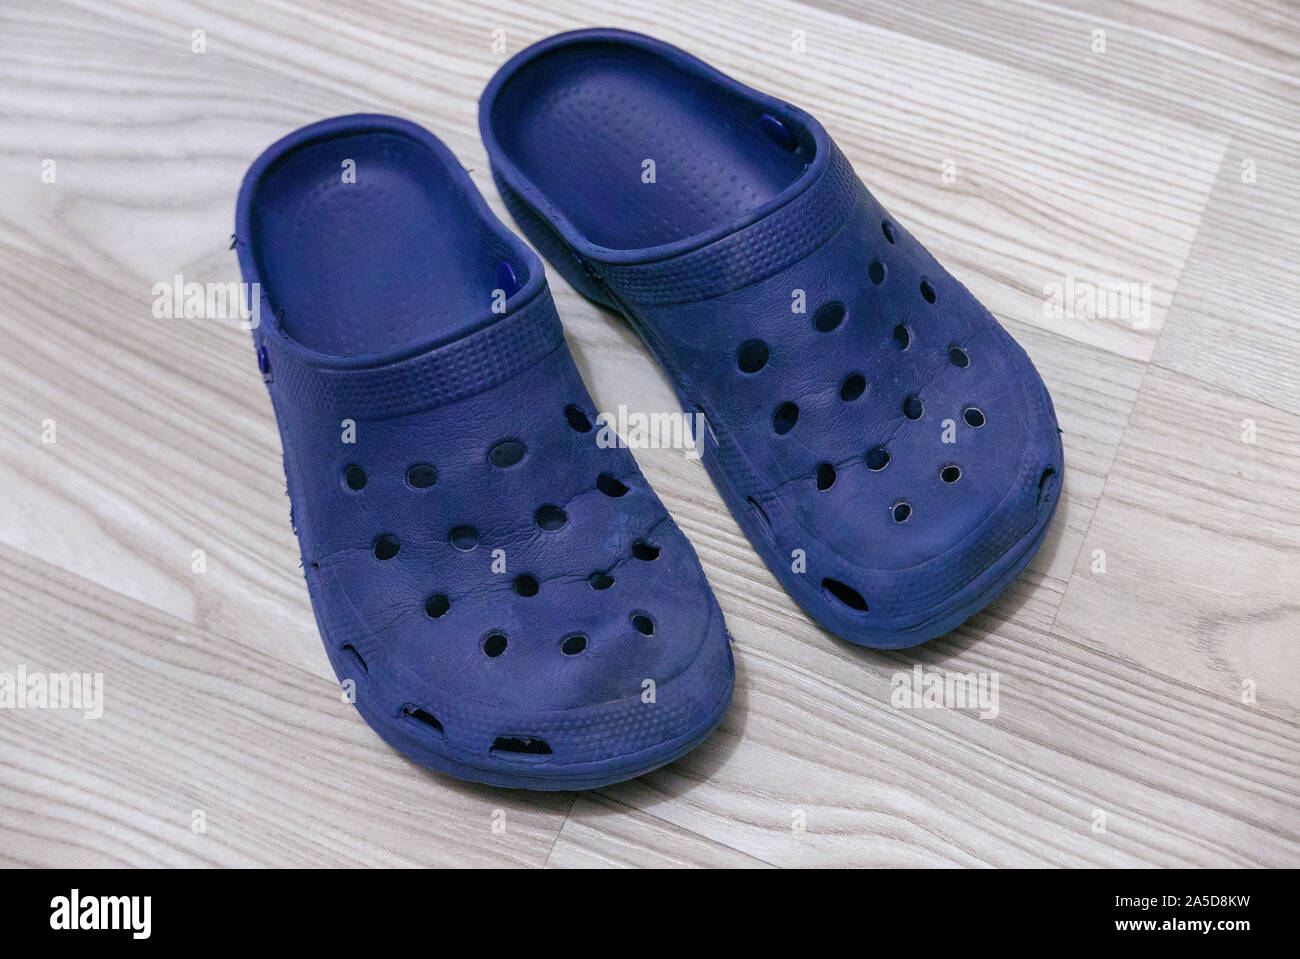 Crocs Clogs High Resolution Stock Photography and Images - Alamy